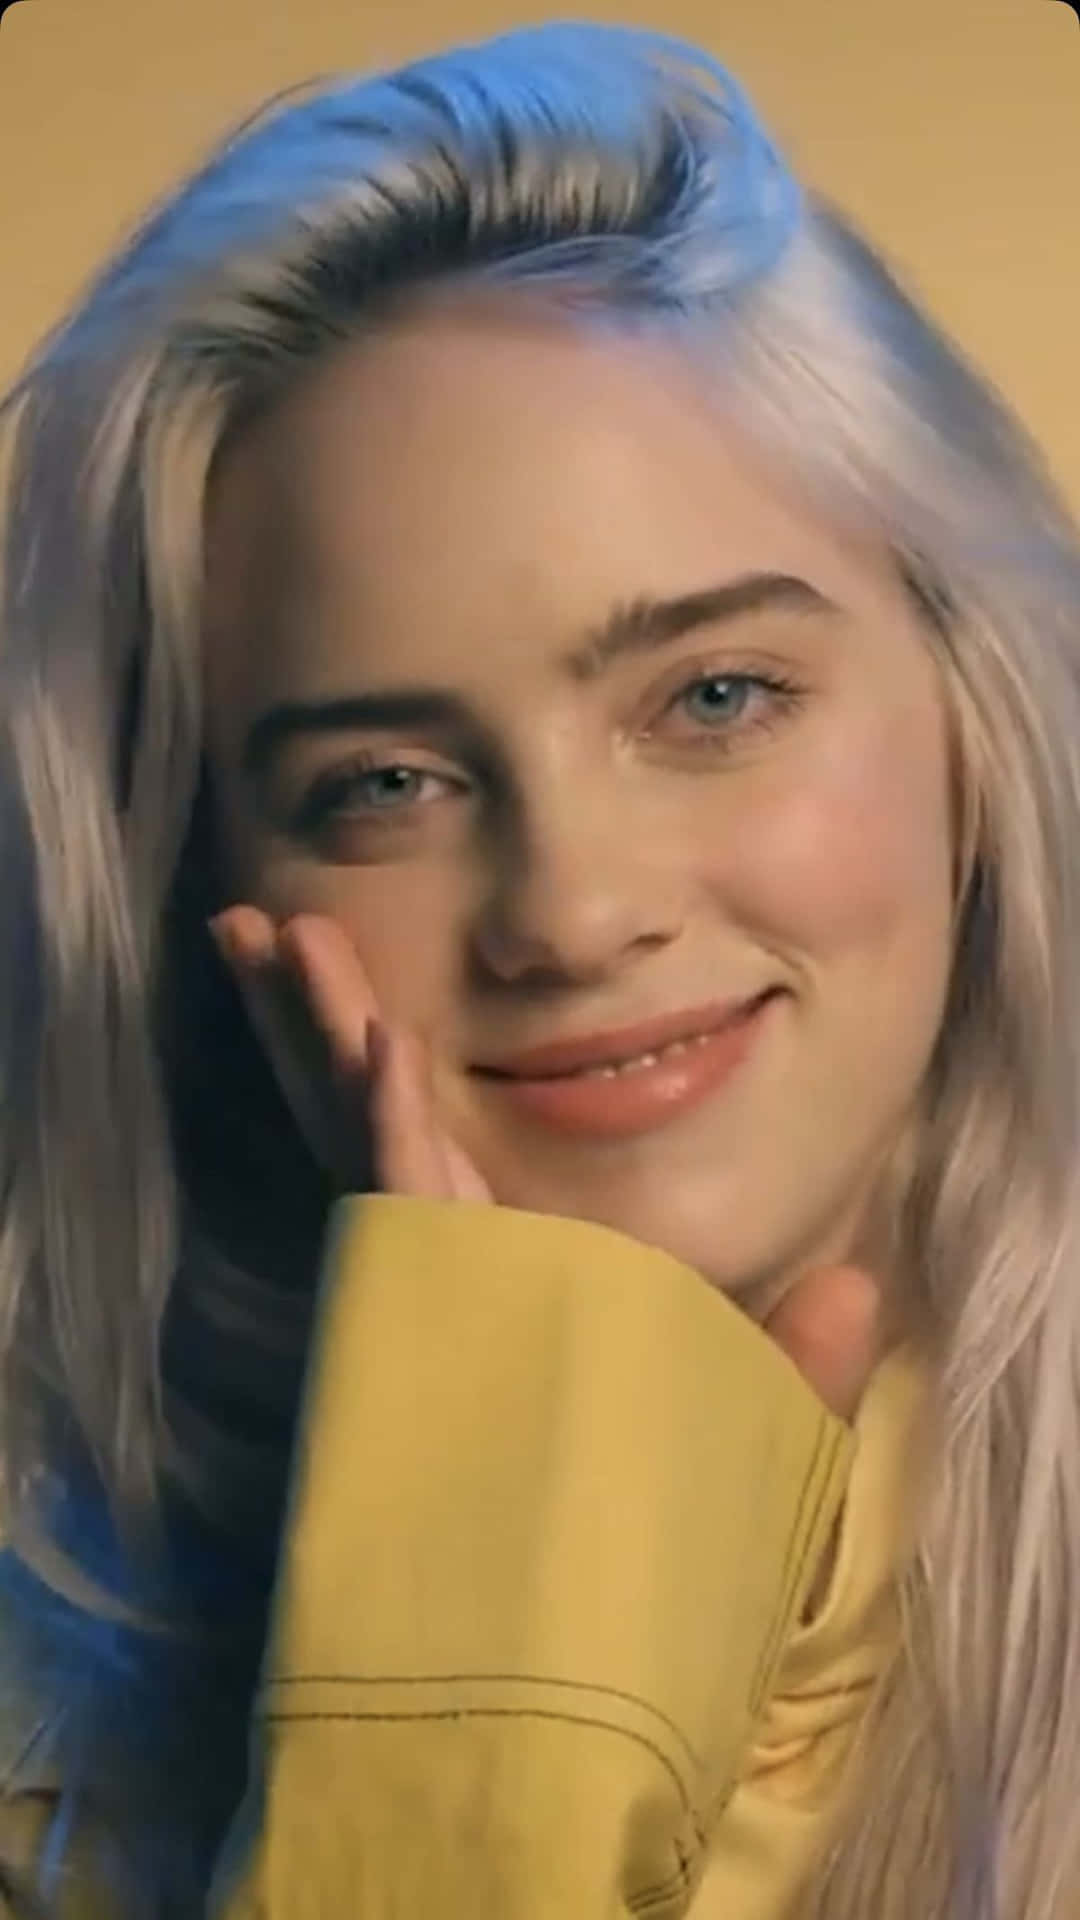 Billie Eilish with a smile on her face Wallpaper